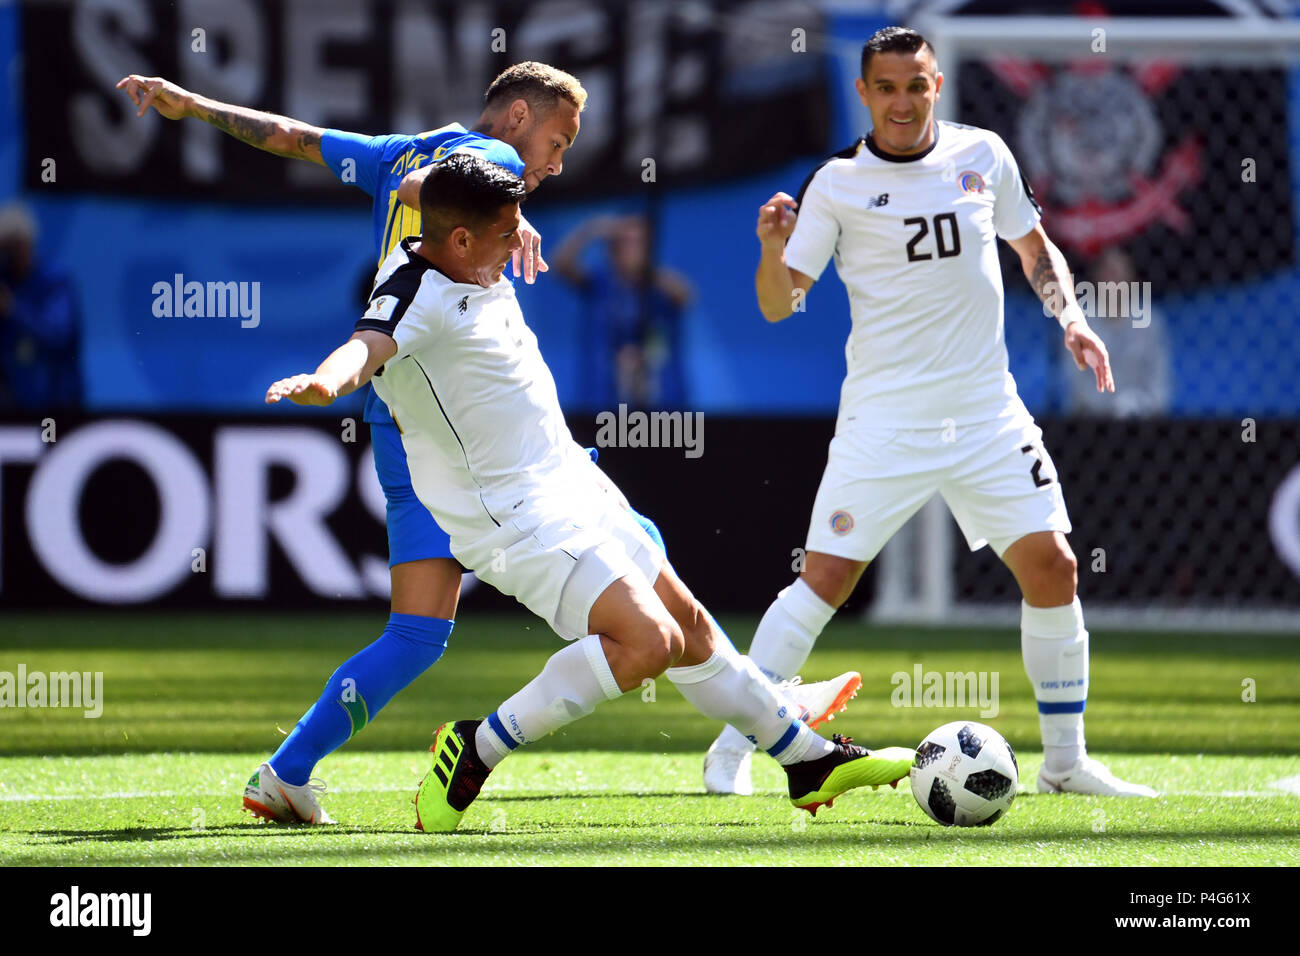 Saint Petersburg, Russia. 22nd June, 2018. Soccer: Preliminary stage, Group E, 2nd matchday: Brazil vs Costa Rica in the St. Petersburg Stadium: Brazil's Neymar (back left) and Costa Rica's Johnny Acosta (front left) and David Guzman in action. Credit: Federico Gambarini/dpa/Alamy Live News Stock Photo